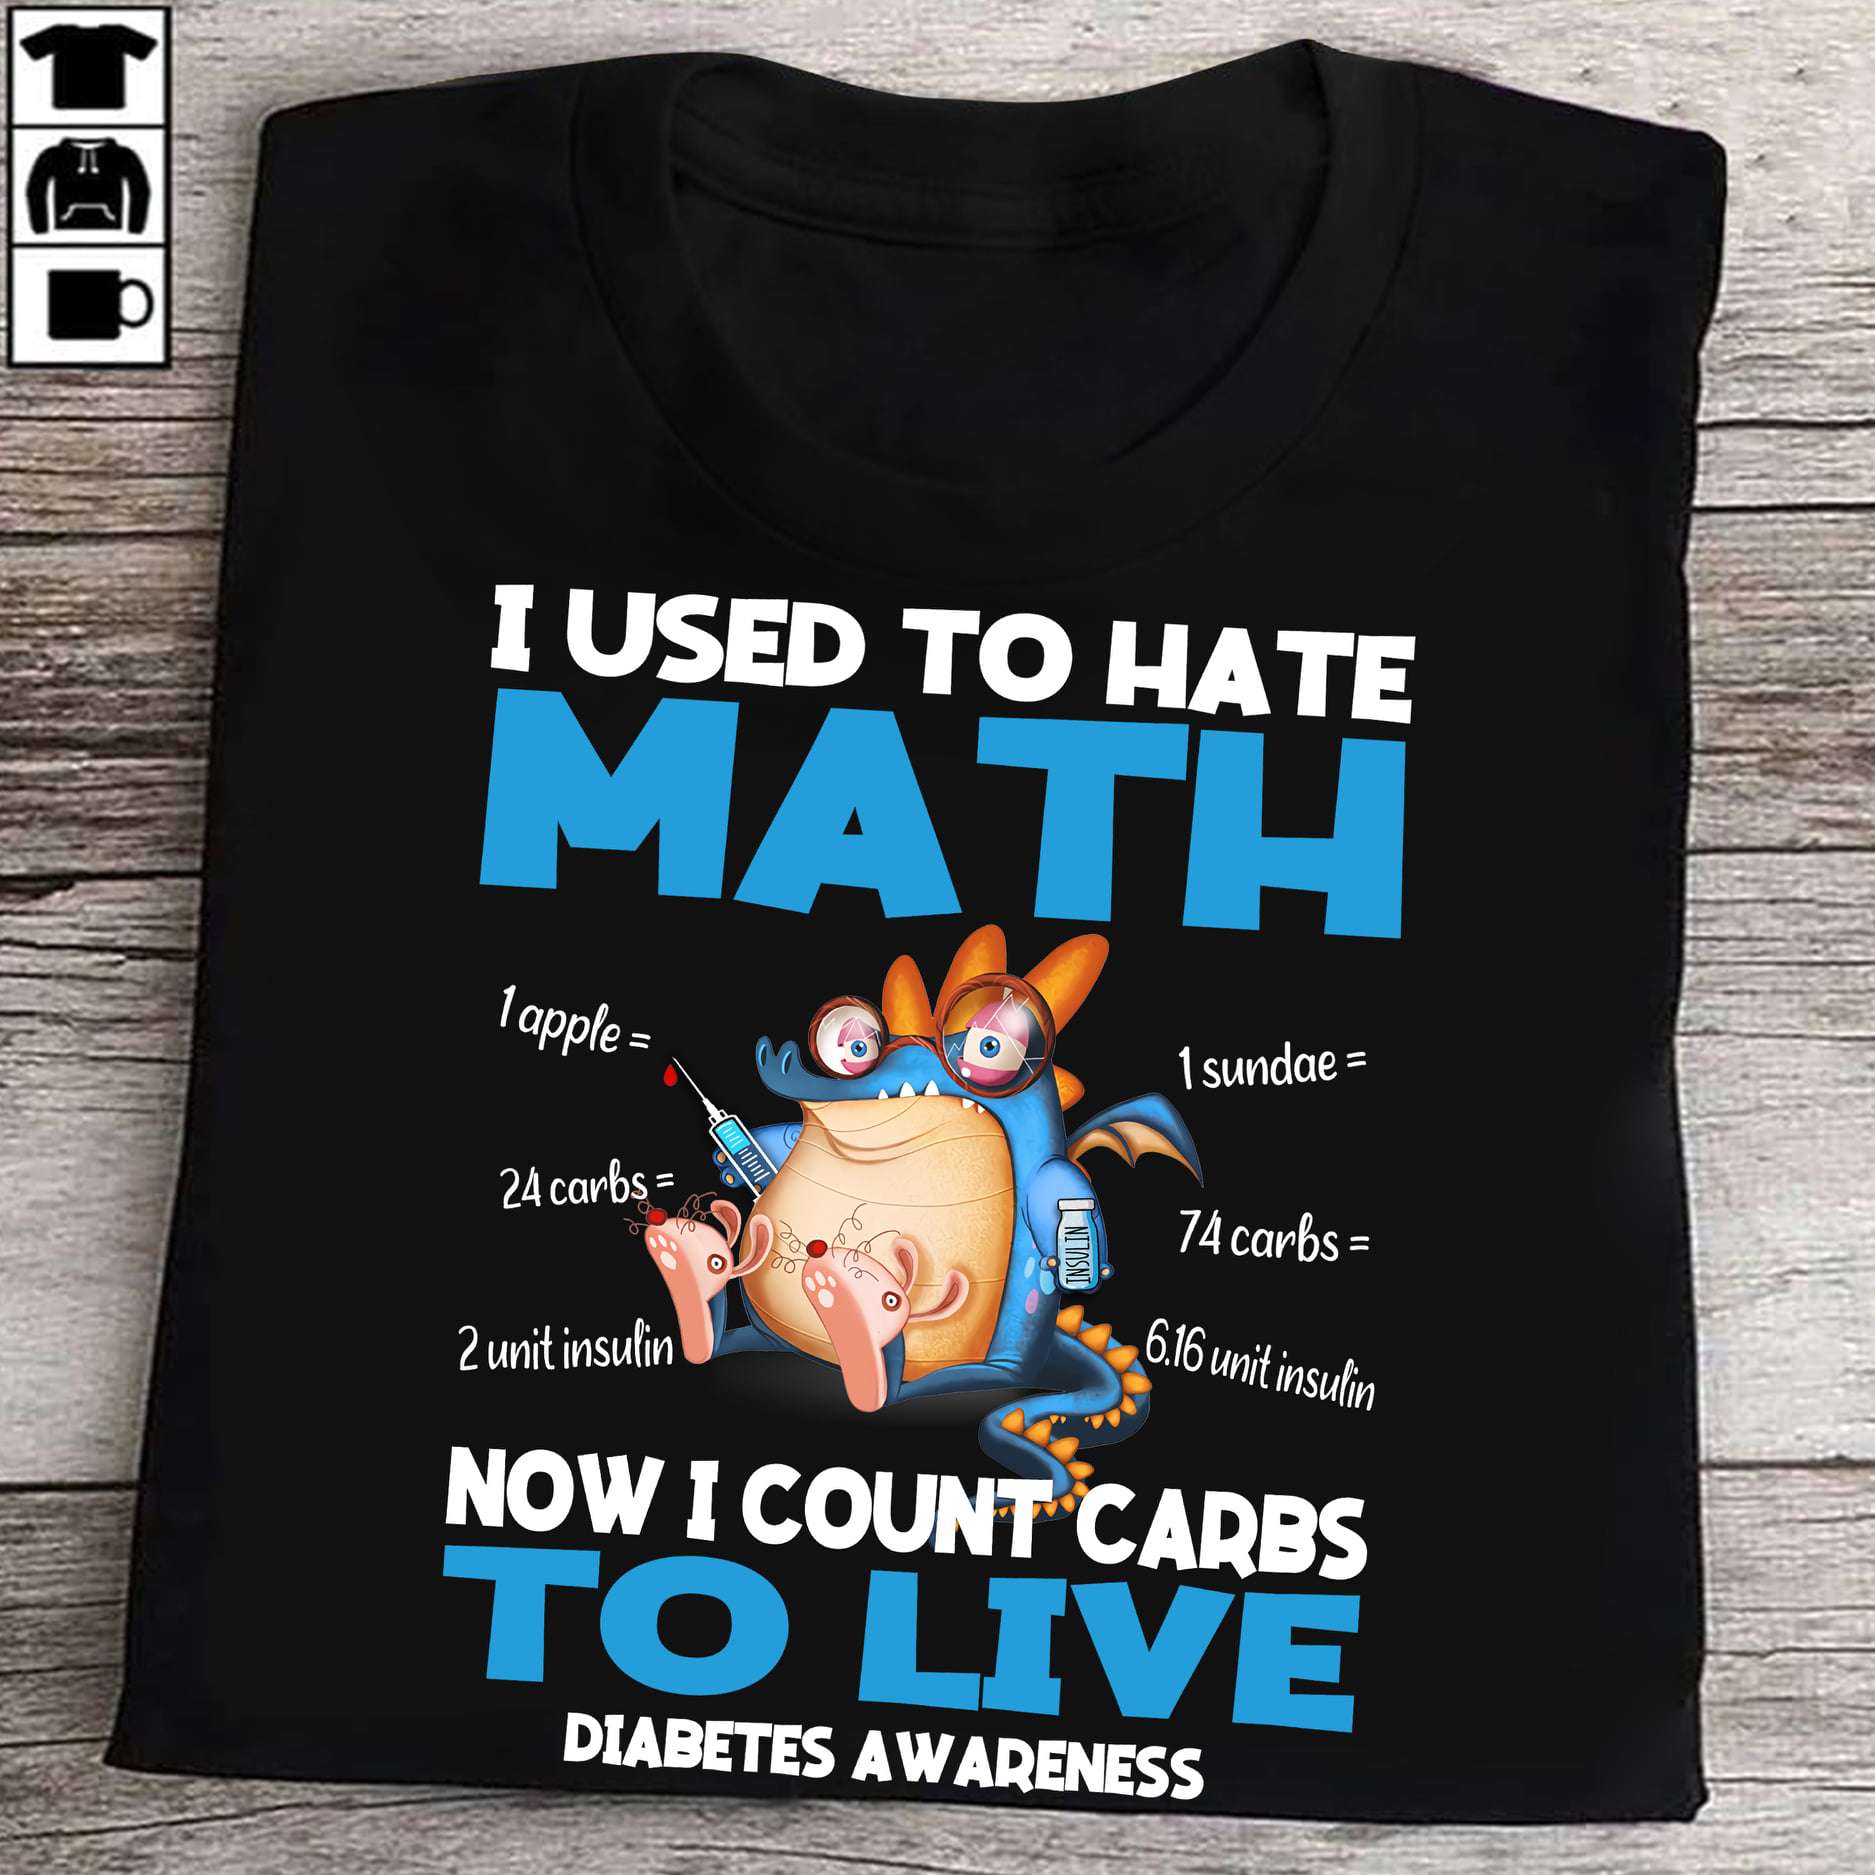 I used to hate math now I count carbs to live - Diabetes awareness, diabetic dragon